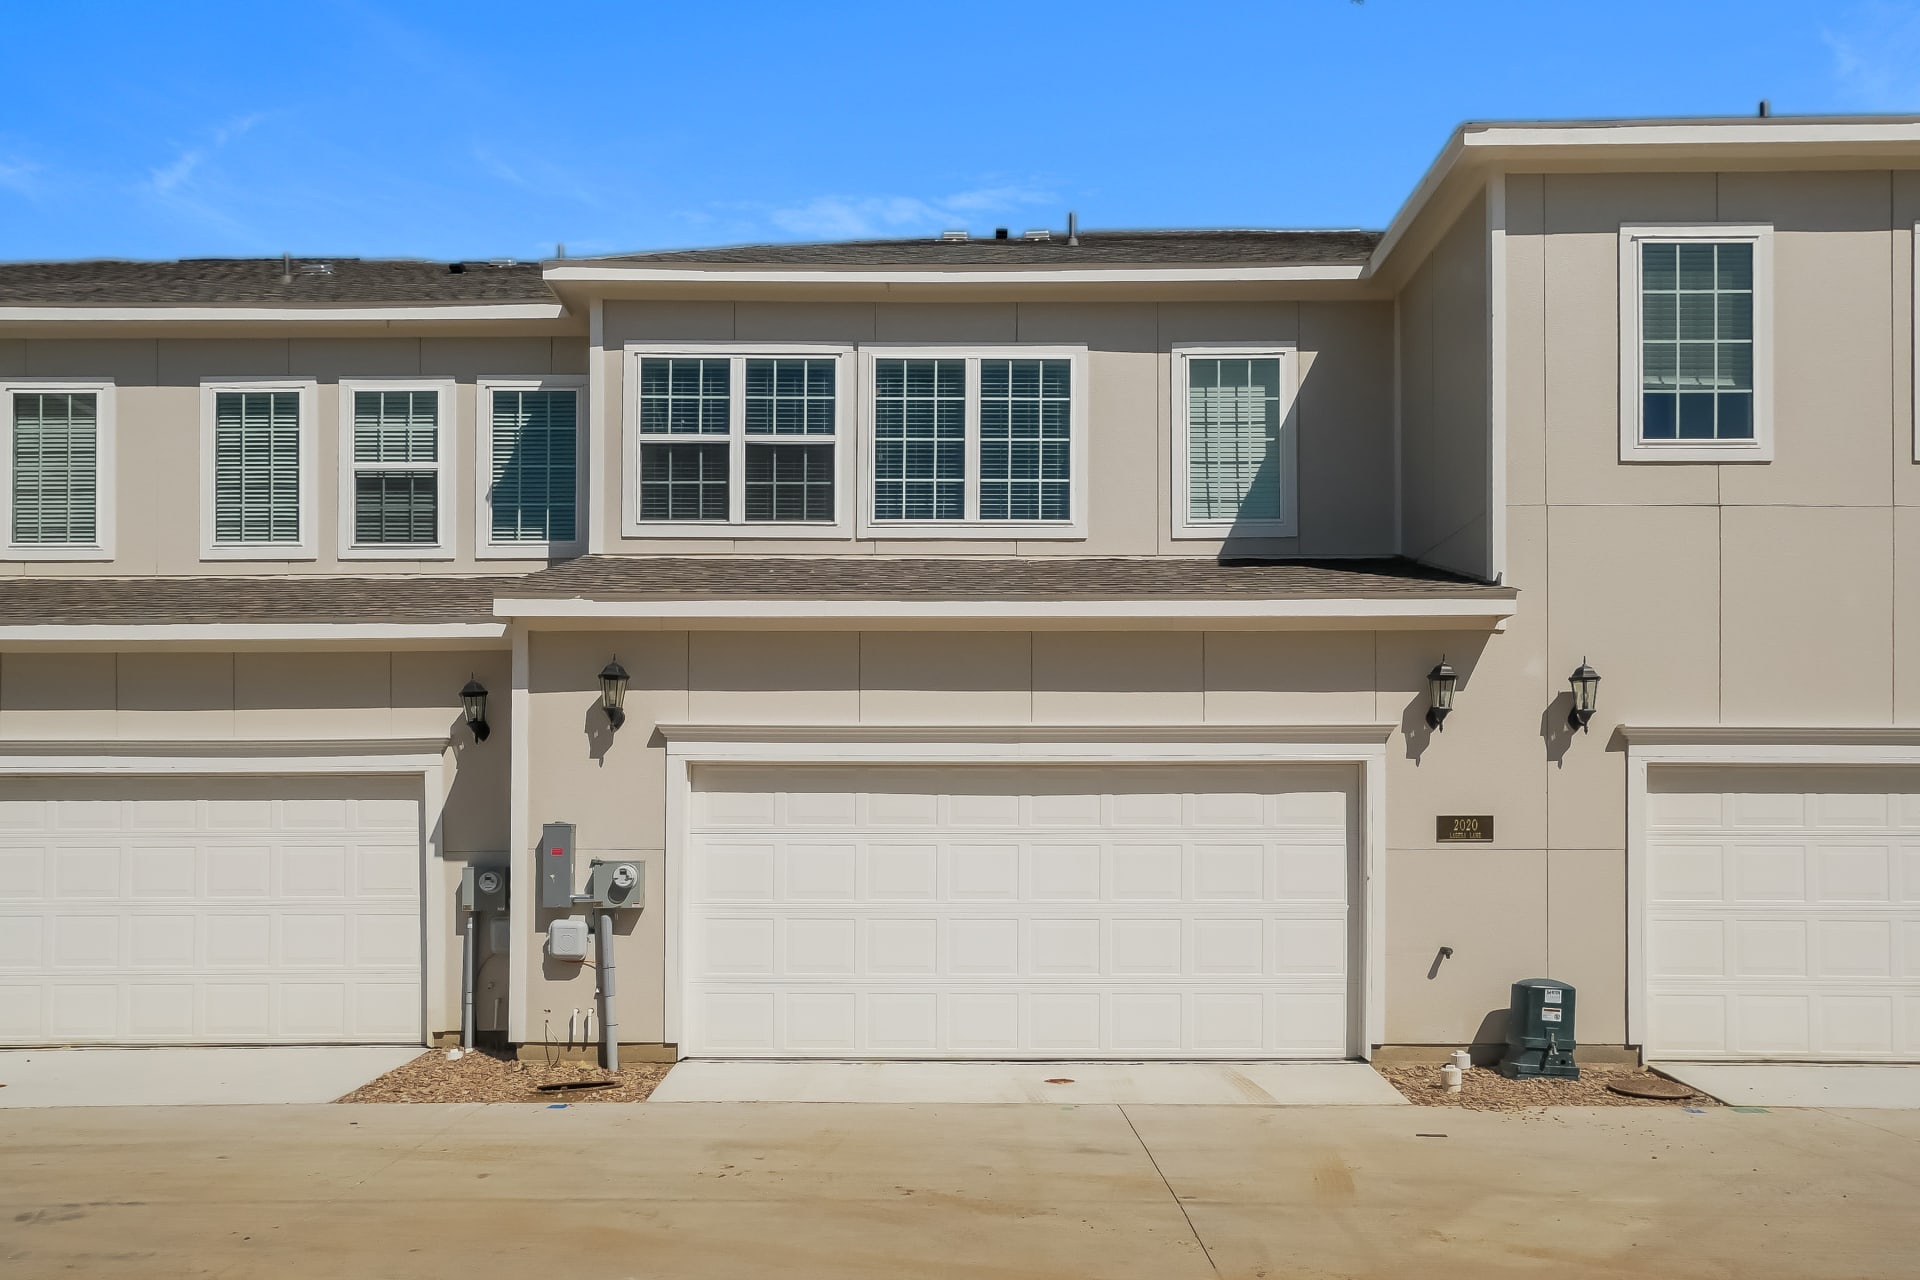 Attached Garages The Residences at Rayzor Ranch Denton (972)584-0086